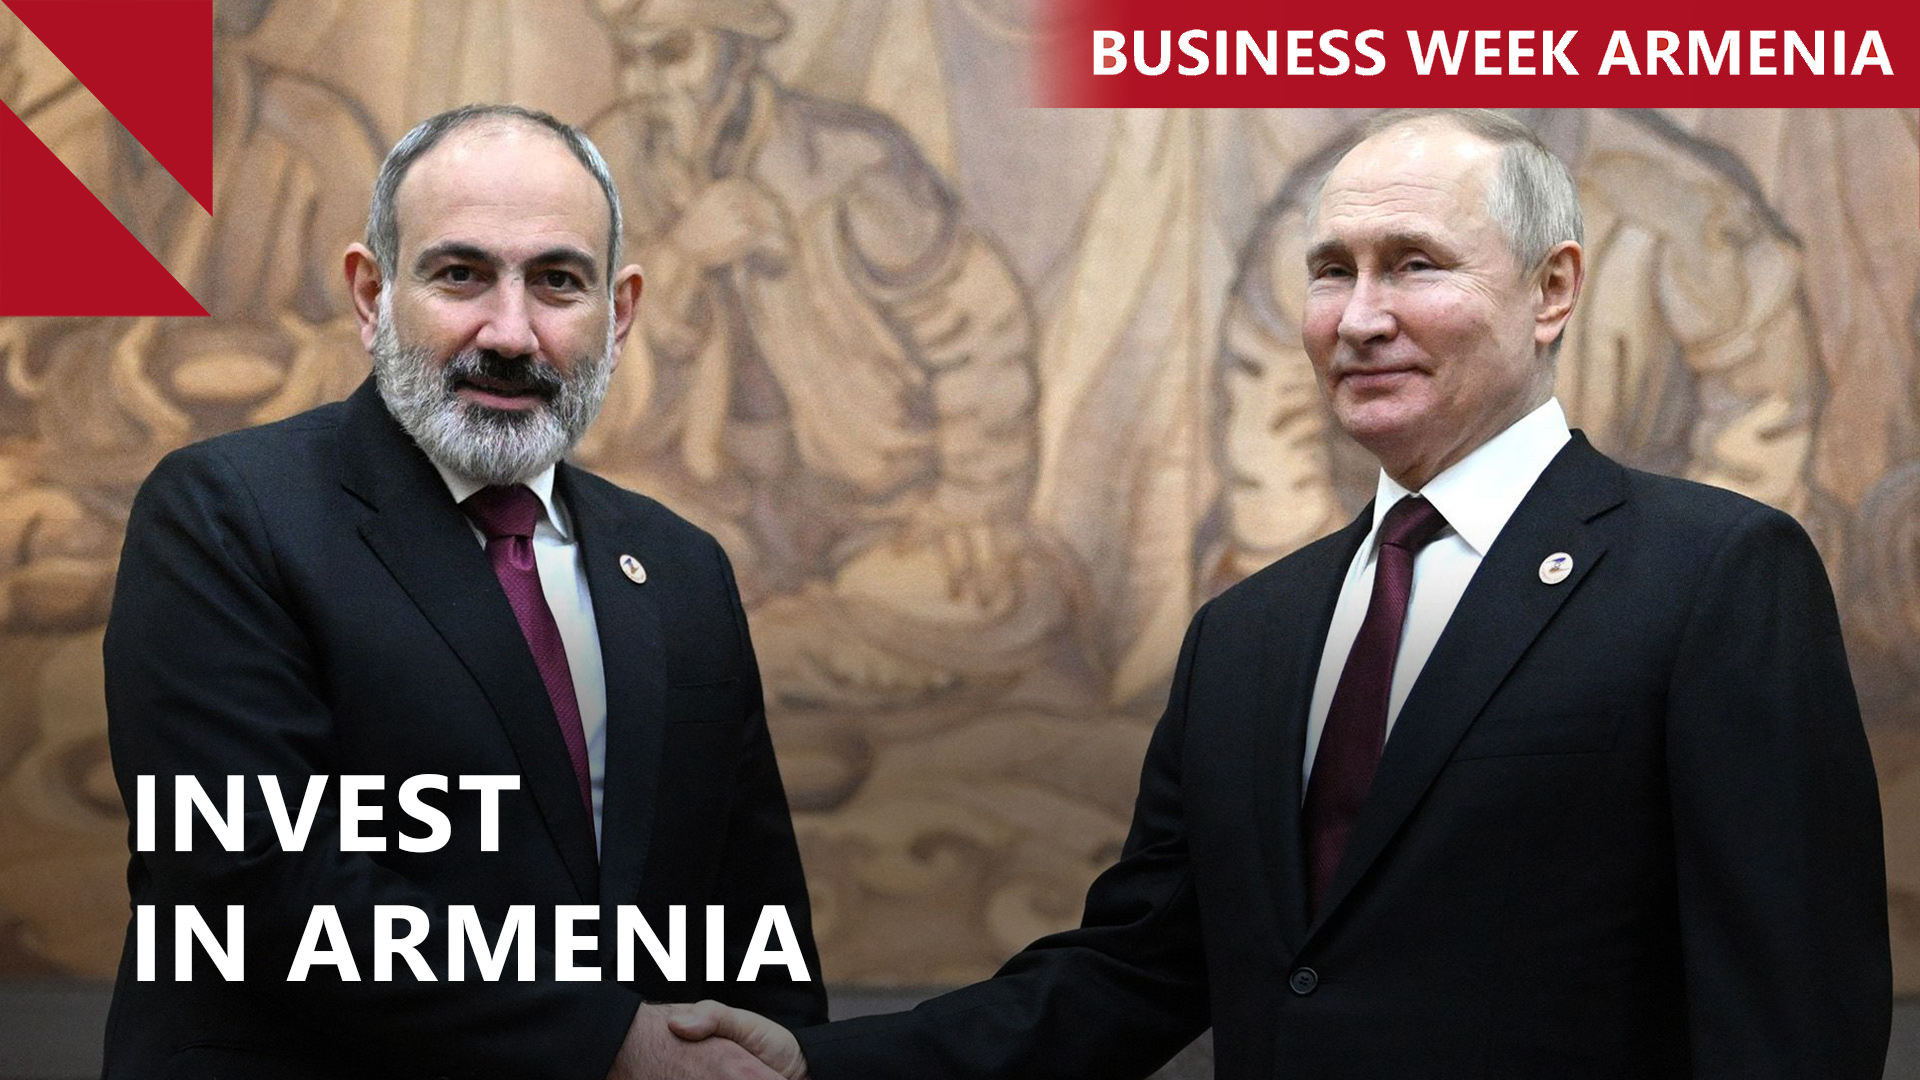 Pashinyan calls on Russia to invest more in Armenia: THIS WEEK IN BUSINESS